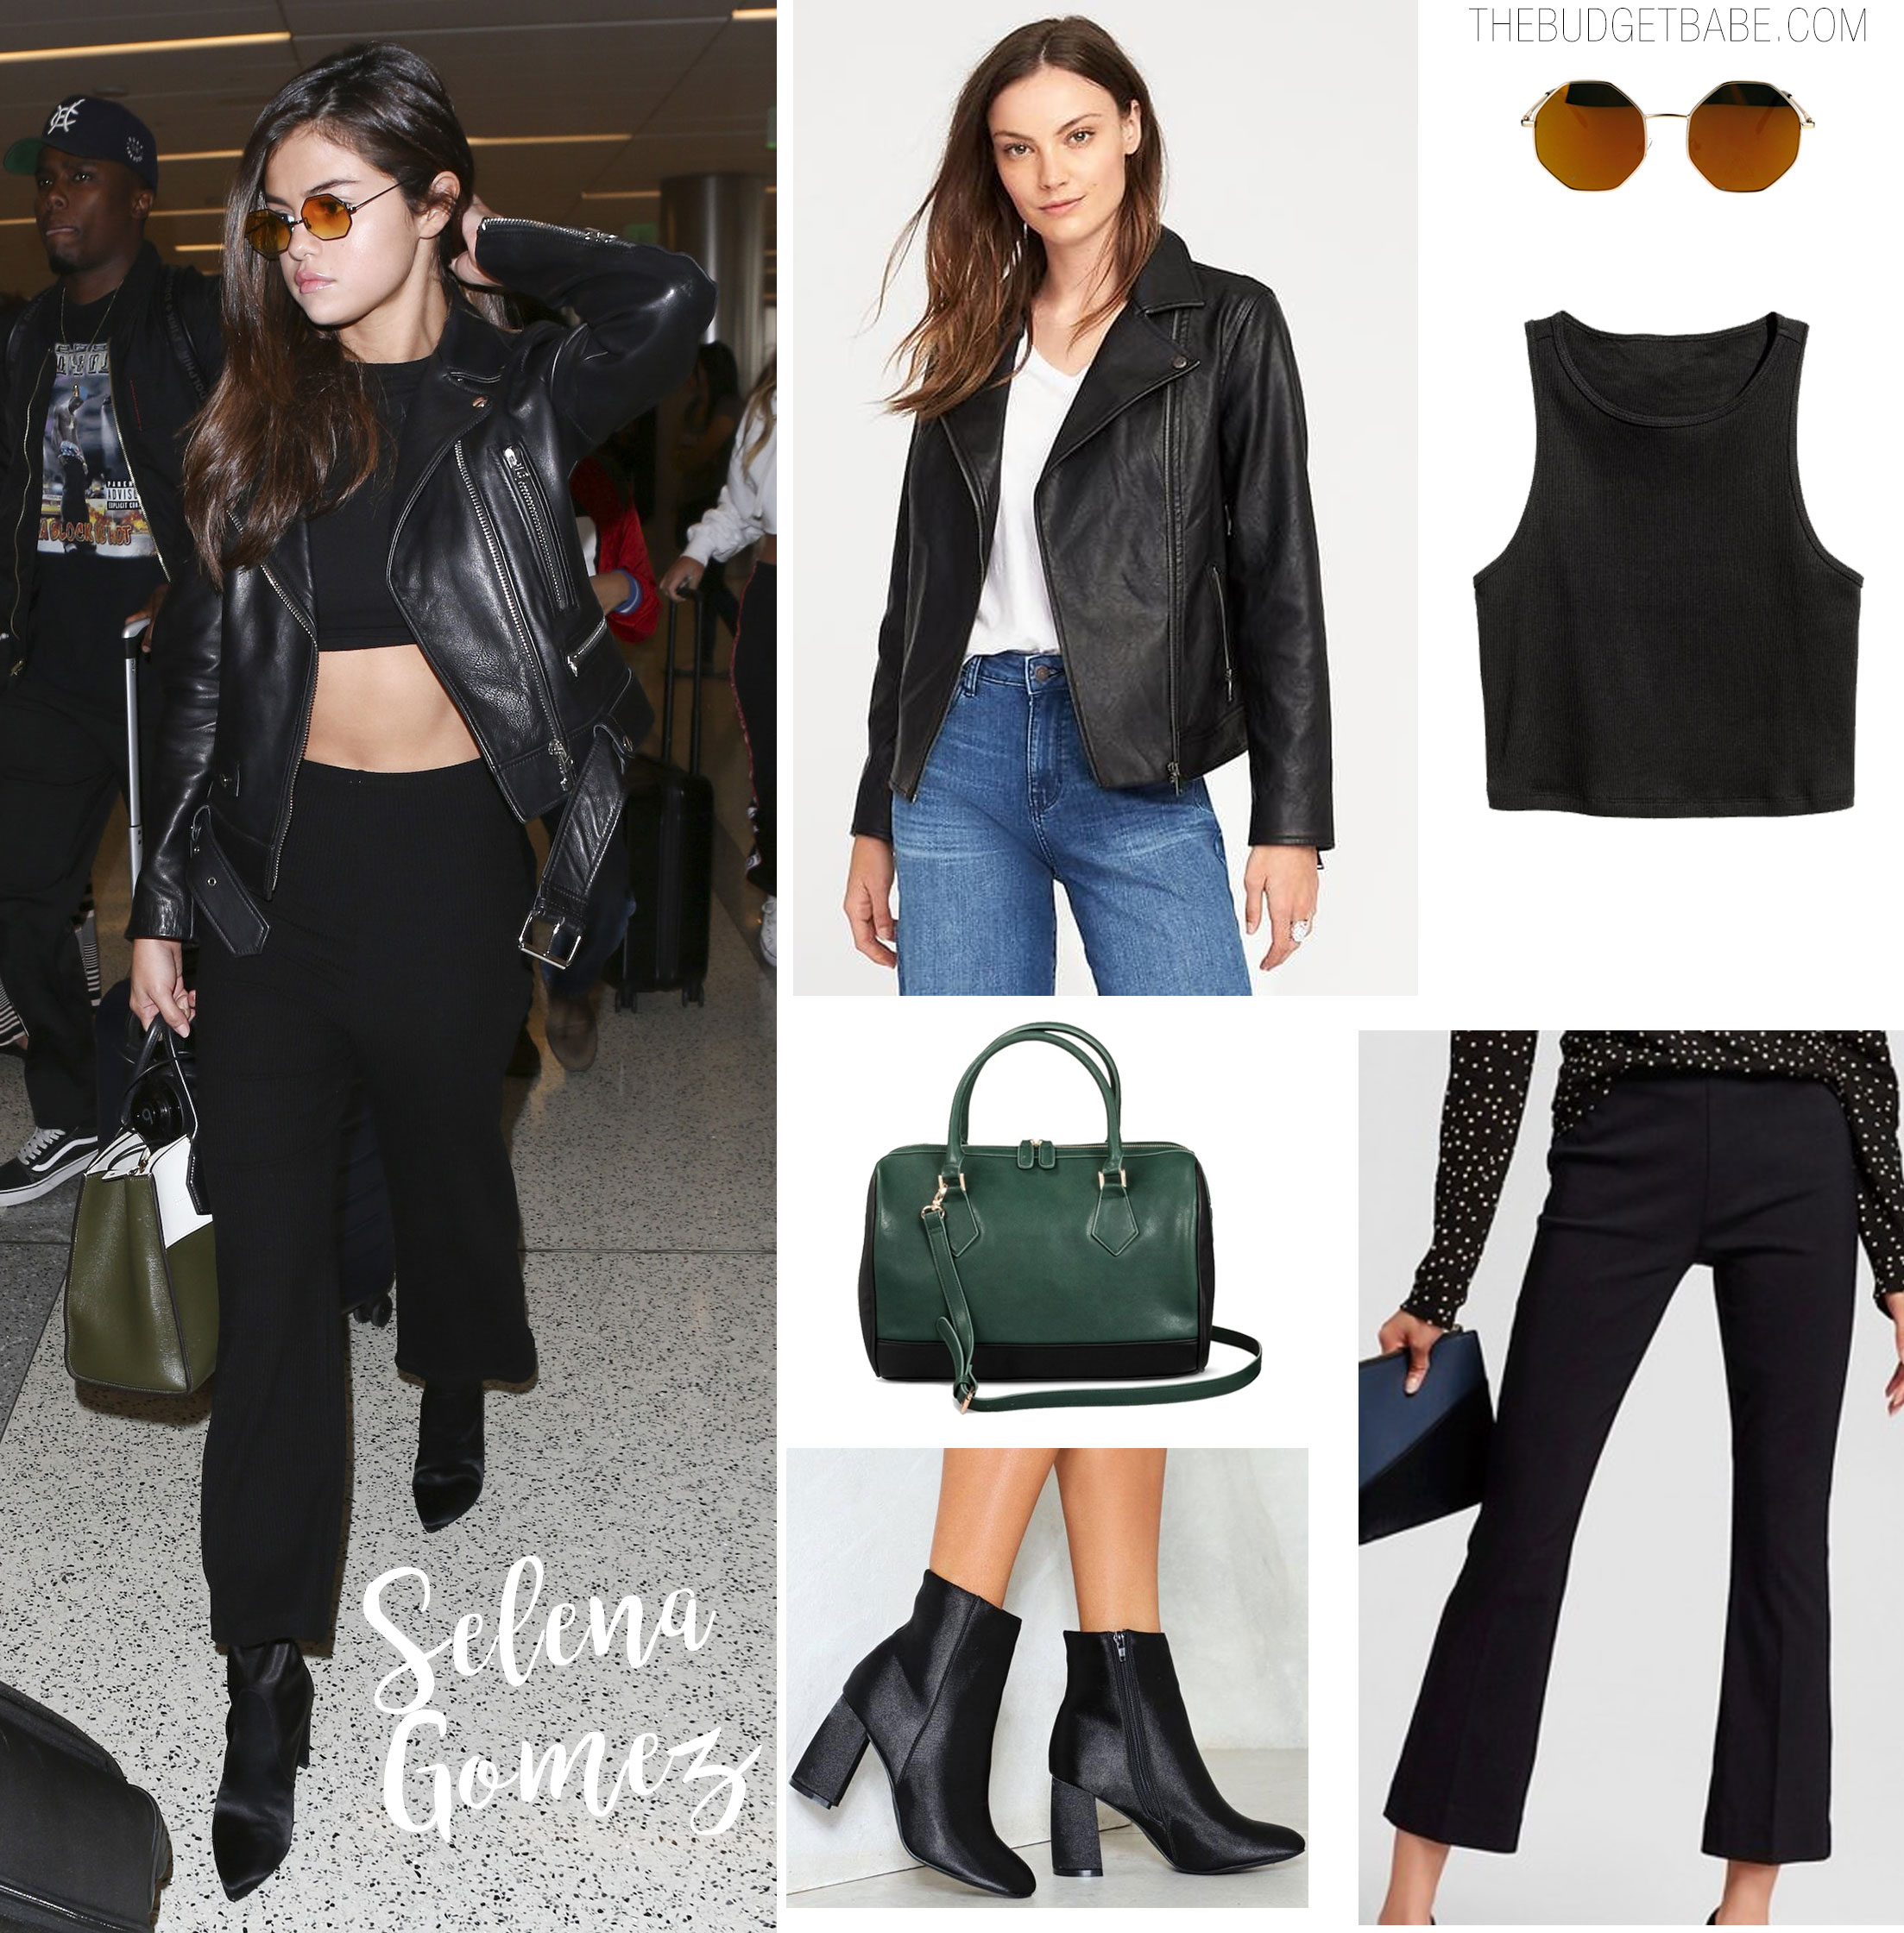 Selena Gomez looks chic in a black crop top, leather jacket, flare leg crop pants and satin boots while making her way through the airport.